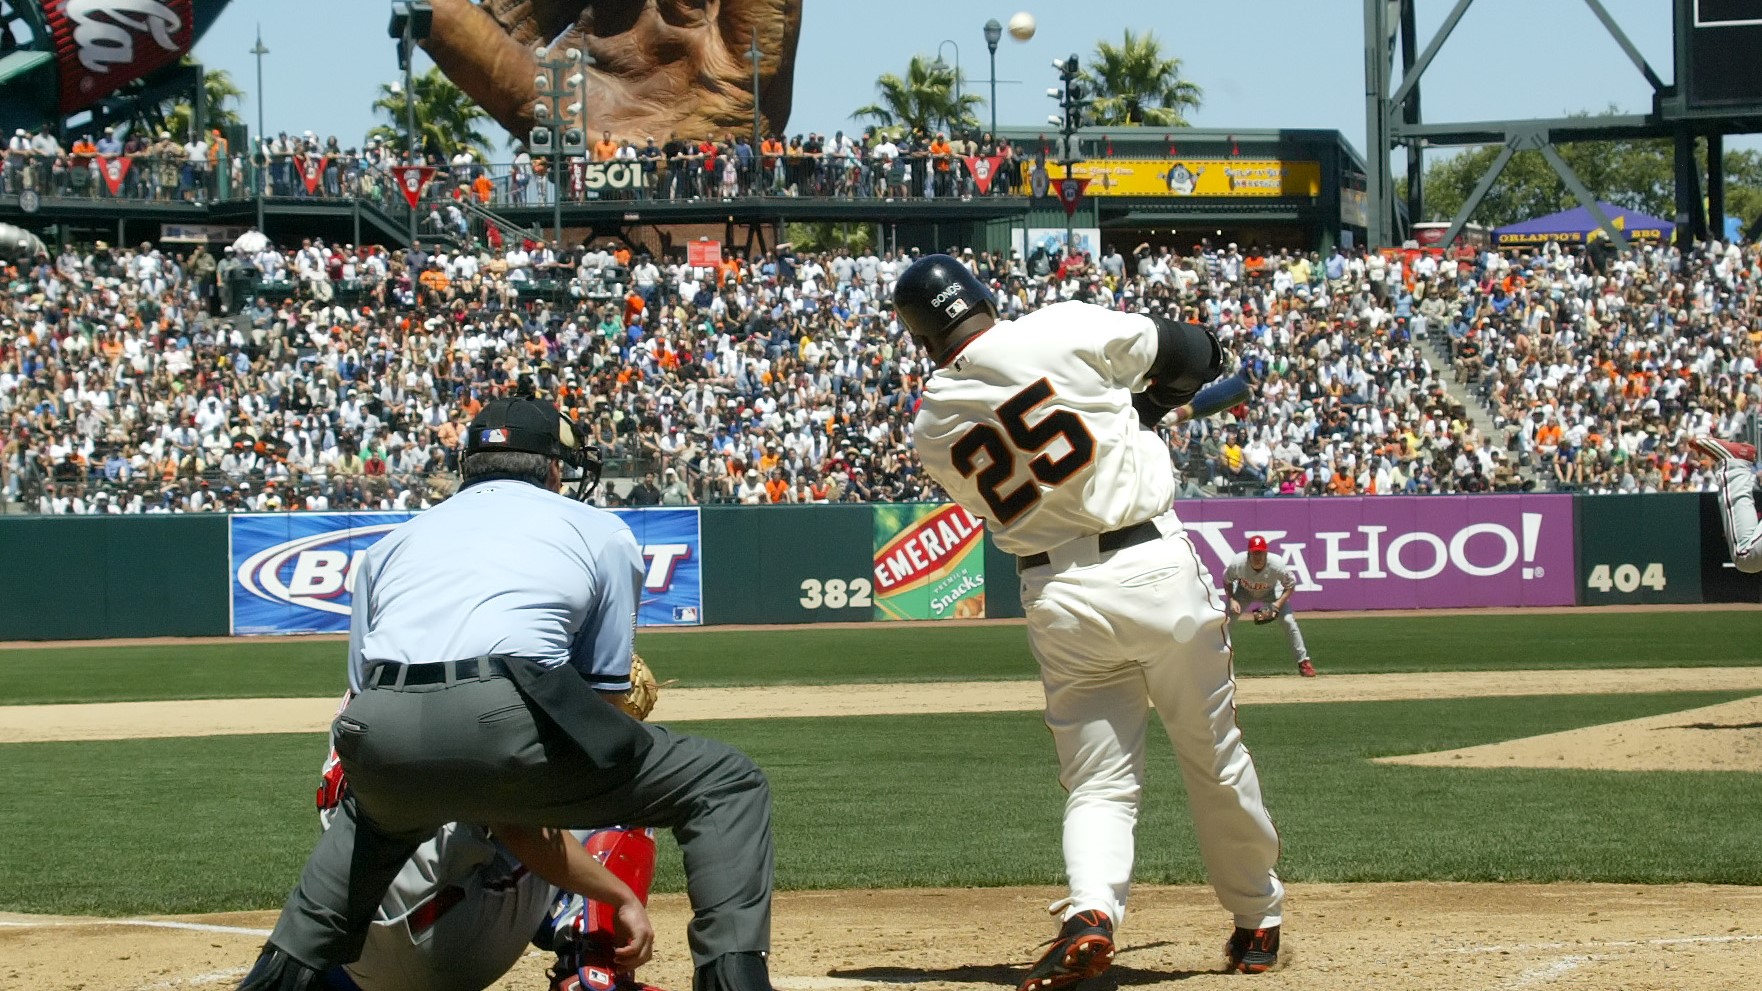 The Hall of Fame needs Barry Bonds far more than he needs it